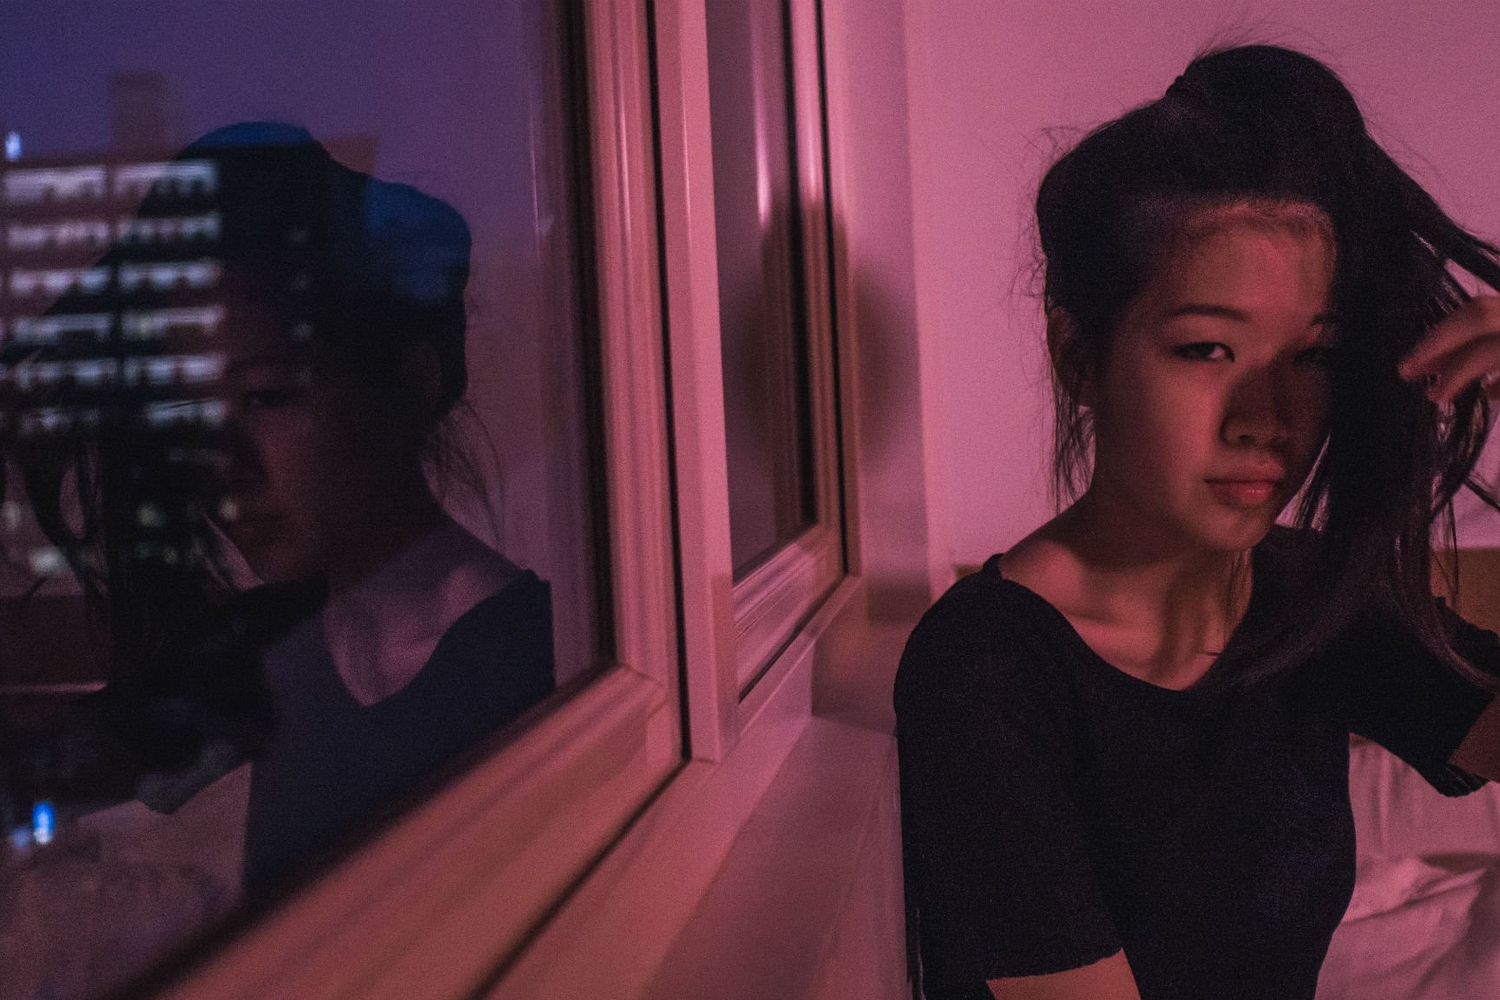 Singapore’s Linying makes her mark with the ‘Paris 12’ EP